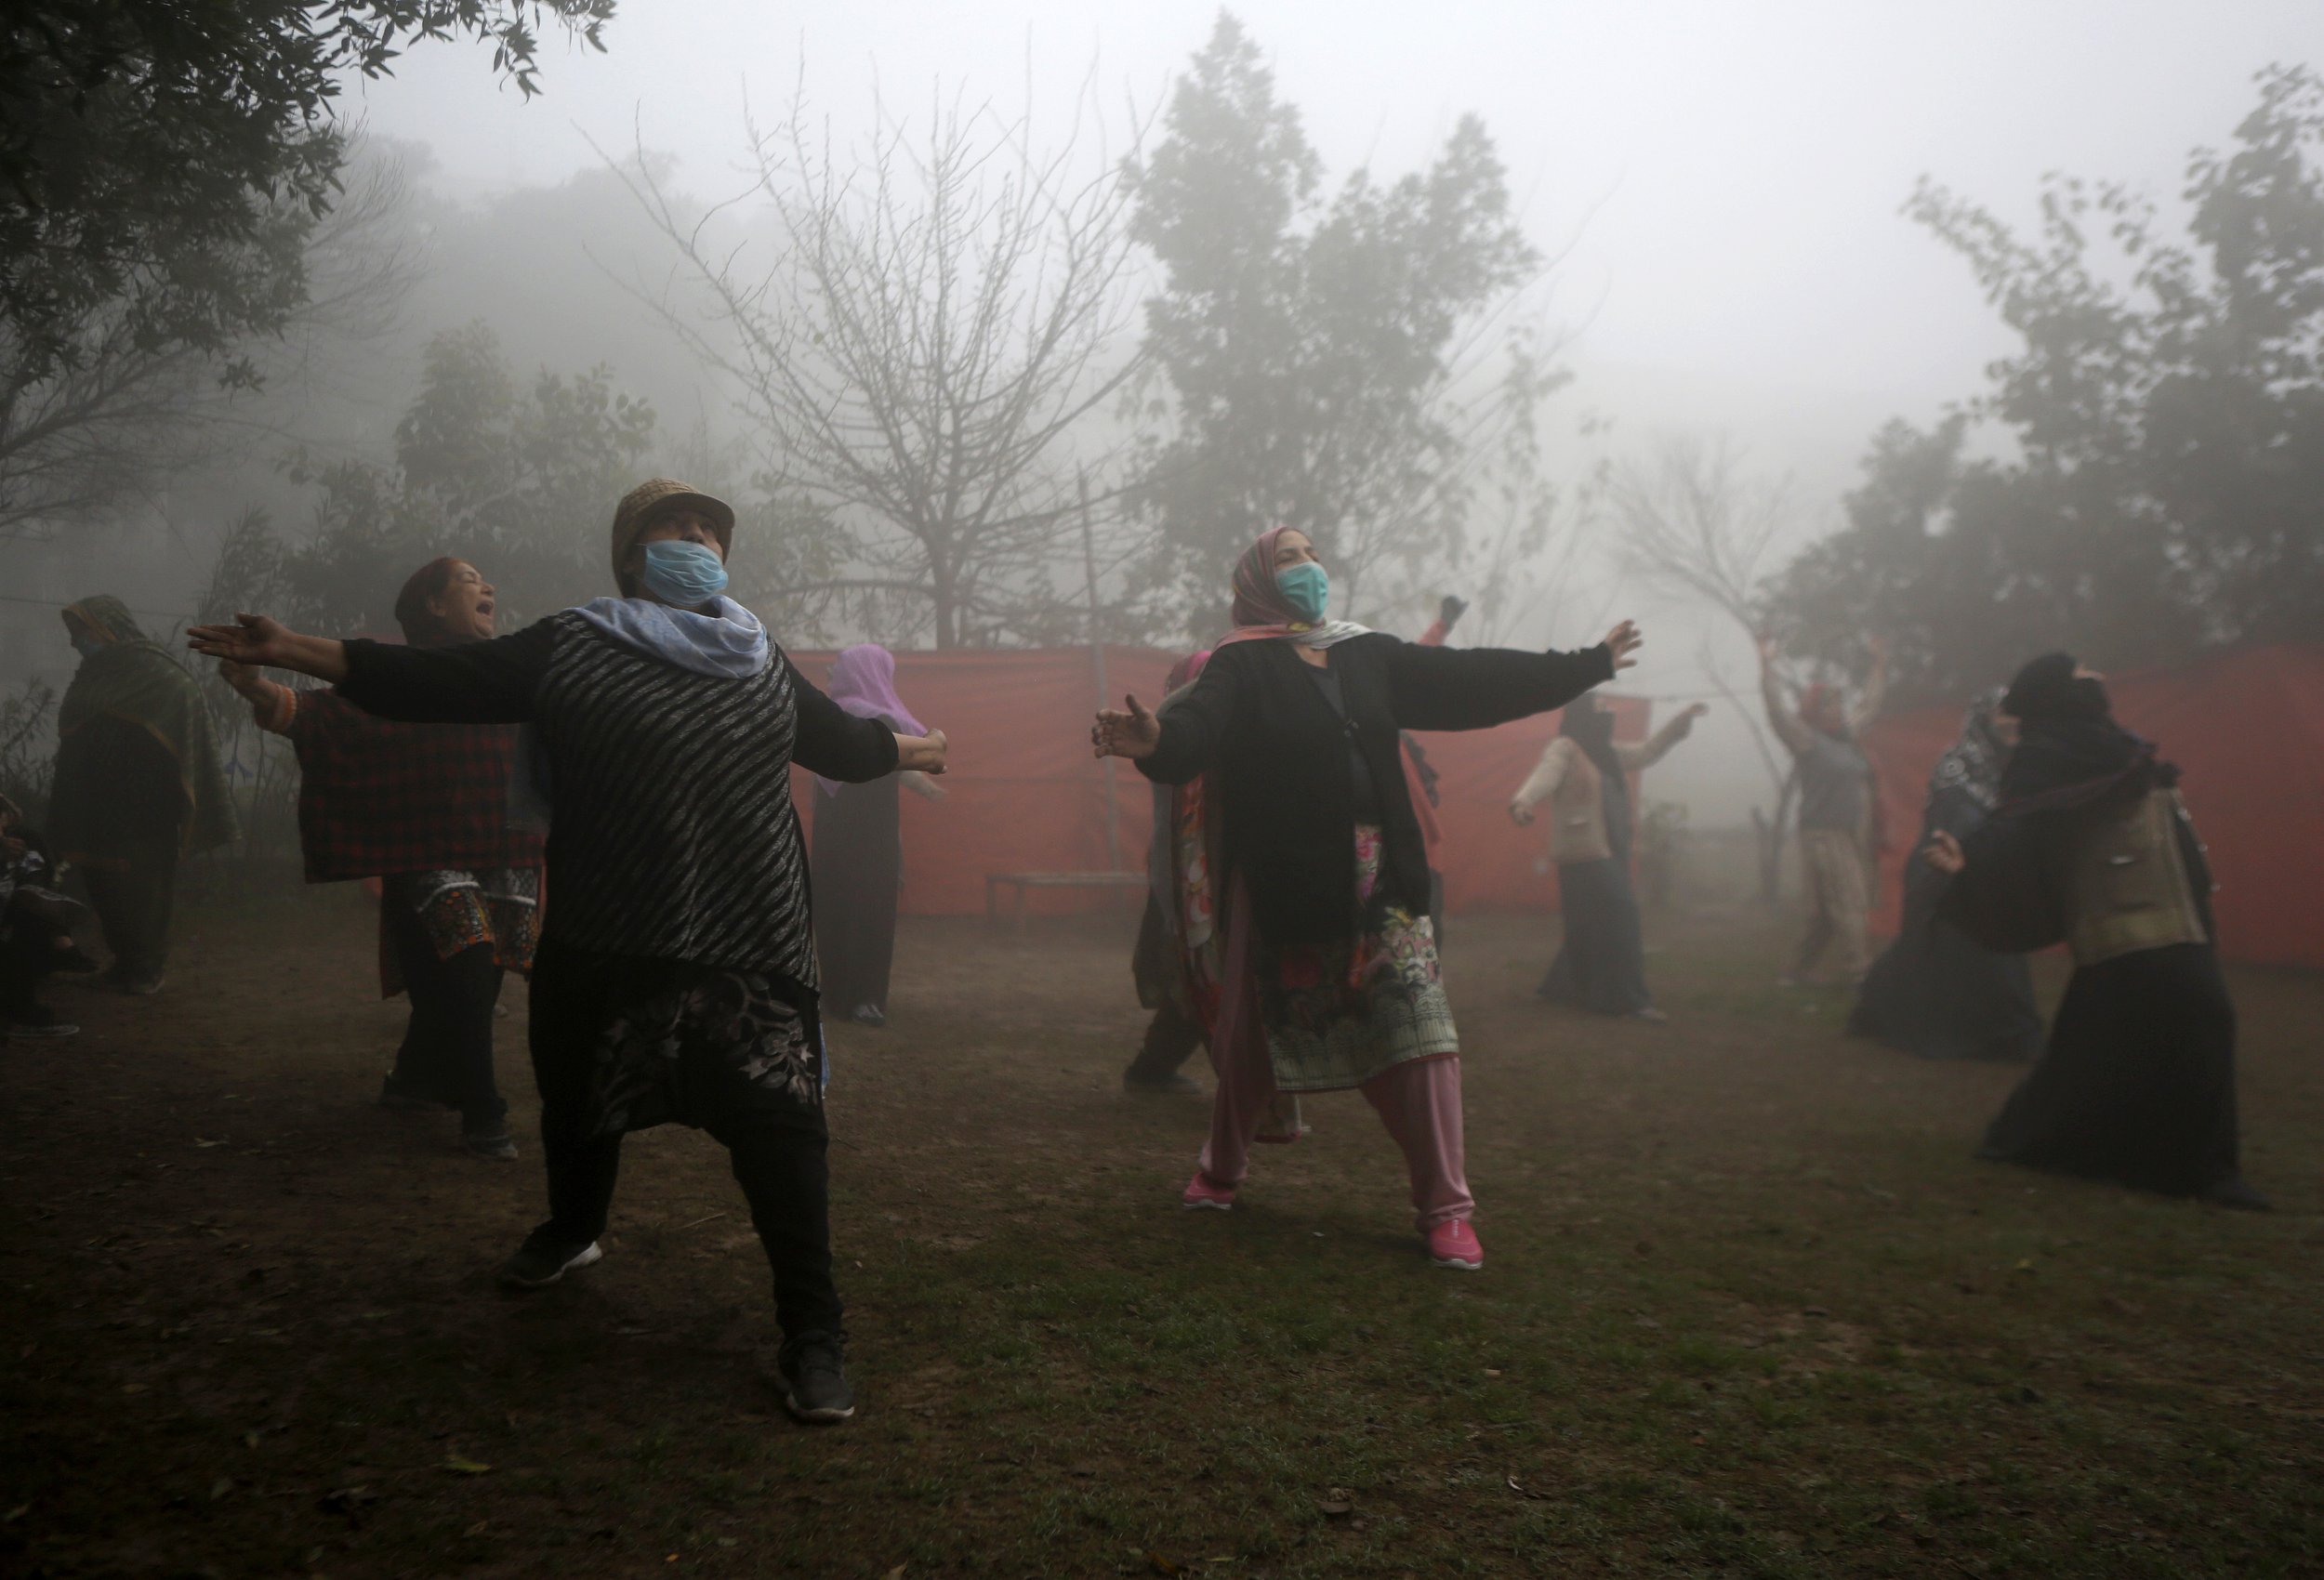  Woman attend their yoga exercise in a park while heavy fog envelops the areas of Lahore, Pakistan, Wednesday, Feb. 17, 2021. (AP Photo/K.M. Chaudary) 